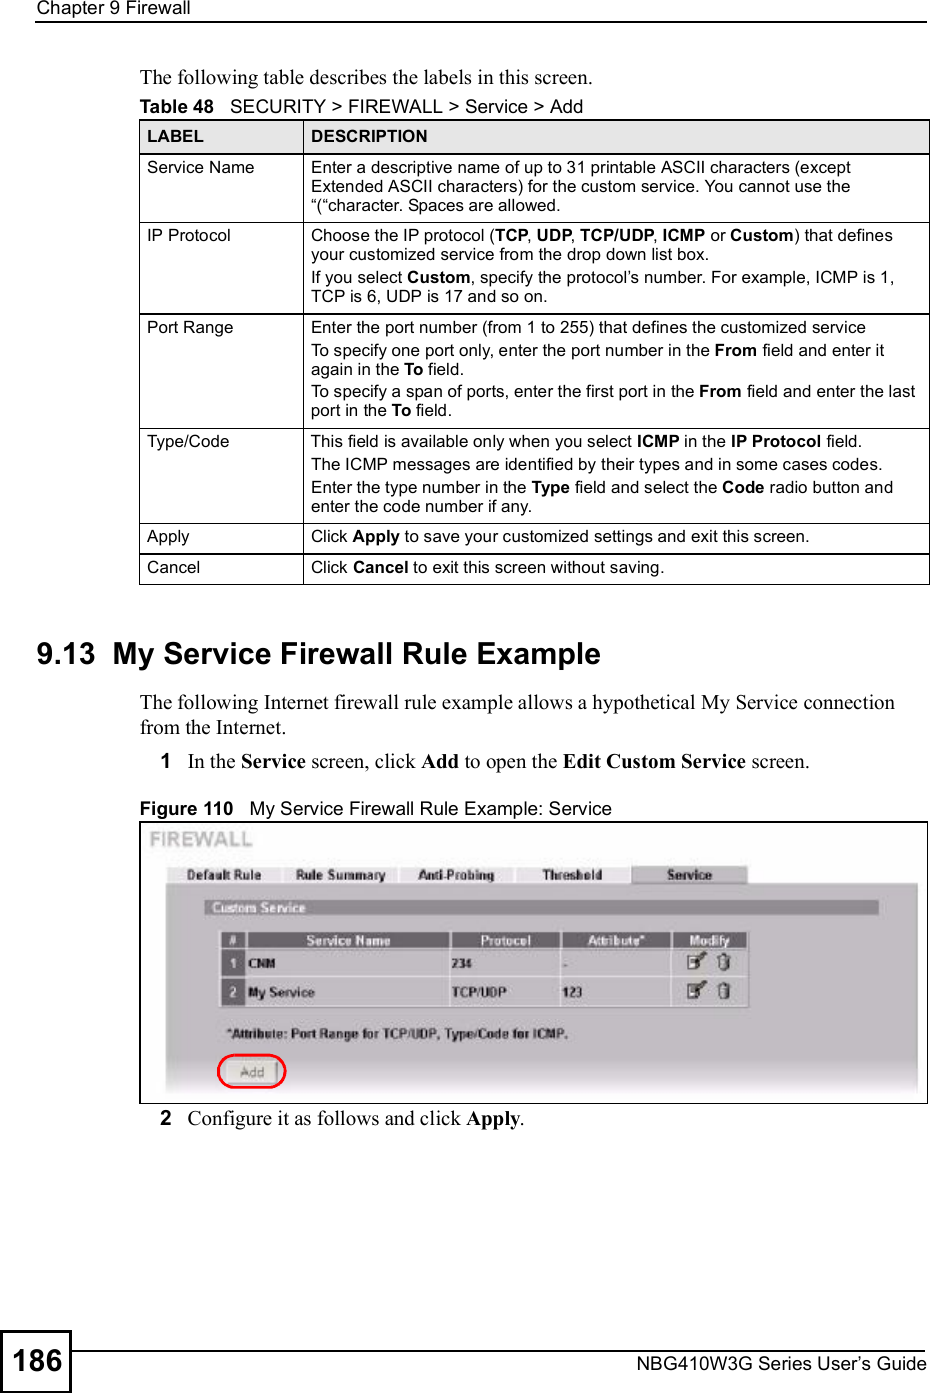 Chapter 9FirewallNBG410W3G Series User s Guide186The following table describes the labels in this screen.9.13  My Service Firewall Rule ExampleThe following Internet firewall rule example allows a hypothetical My Service connection from the Internet.1In the Service screen, click Add to open the Edit Custom Service screen. Figure 110   My Service Firewall Rule Example: Service 2Configure it as follows and click Apply.Table 48   SECURITY &gt; FIREWALL &gt; Service &gt; AddLABEL DESCRIPTIONService NameEnter a descriptive name of up to 31 printable ASCII characters (except Extended ASCII characters) for the custom service. You cannot use the &quot;(&quot;character. Spaces are allowed. IP ProtocolChoose the IP protocol (TCP, UDP, TCP/UDP, ICMP or Custom) that defines your customized service from the drop down list box.If you select Custom, specify the protocol s number. For example, ICMP is 1, TCP is 6, UDP is 17 and so on.Port RangeEnter the port number (from 1 to 255) that defines the customized serviceTo specify one port only, enter the port number in the From field and enter it again in the To field.To specify a span of ports, enter the first port in the From field and enter the last port in the To field. Type/CodeThis field is available only when you select ICMP in the IP Protocol field.The ICMP messages are identified by their types and in some cases codes. Enter the type number in the Type field and select the Code radio button and enter the code number if any.ApplyClick Apply to save your customized settings and exit this screen.CancelClick Cancel to exit this screen without saving.